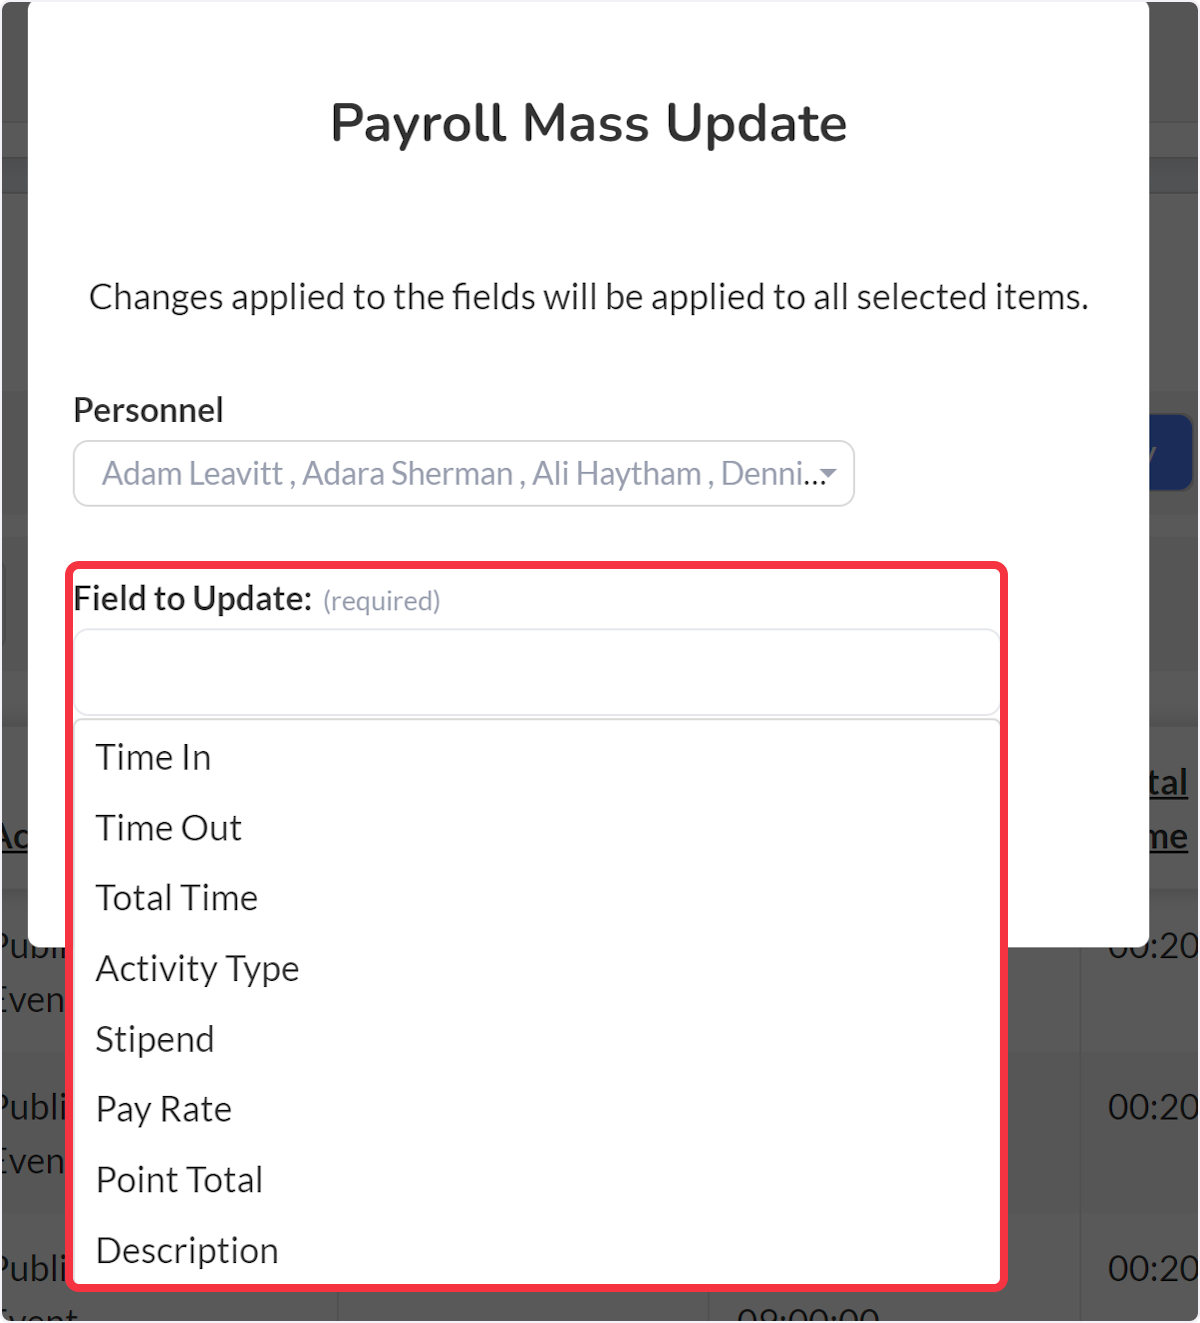 The Payroll Mass Update will appear.